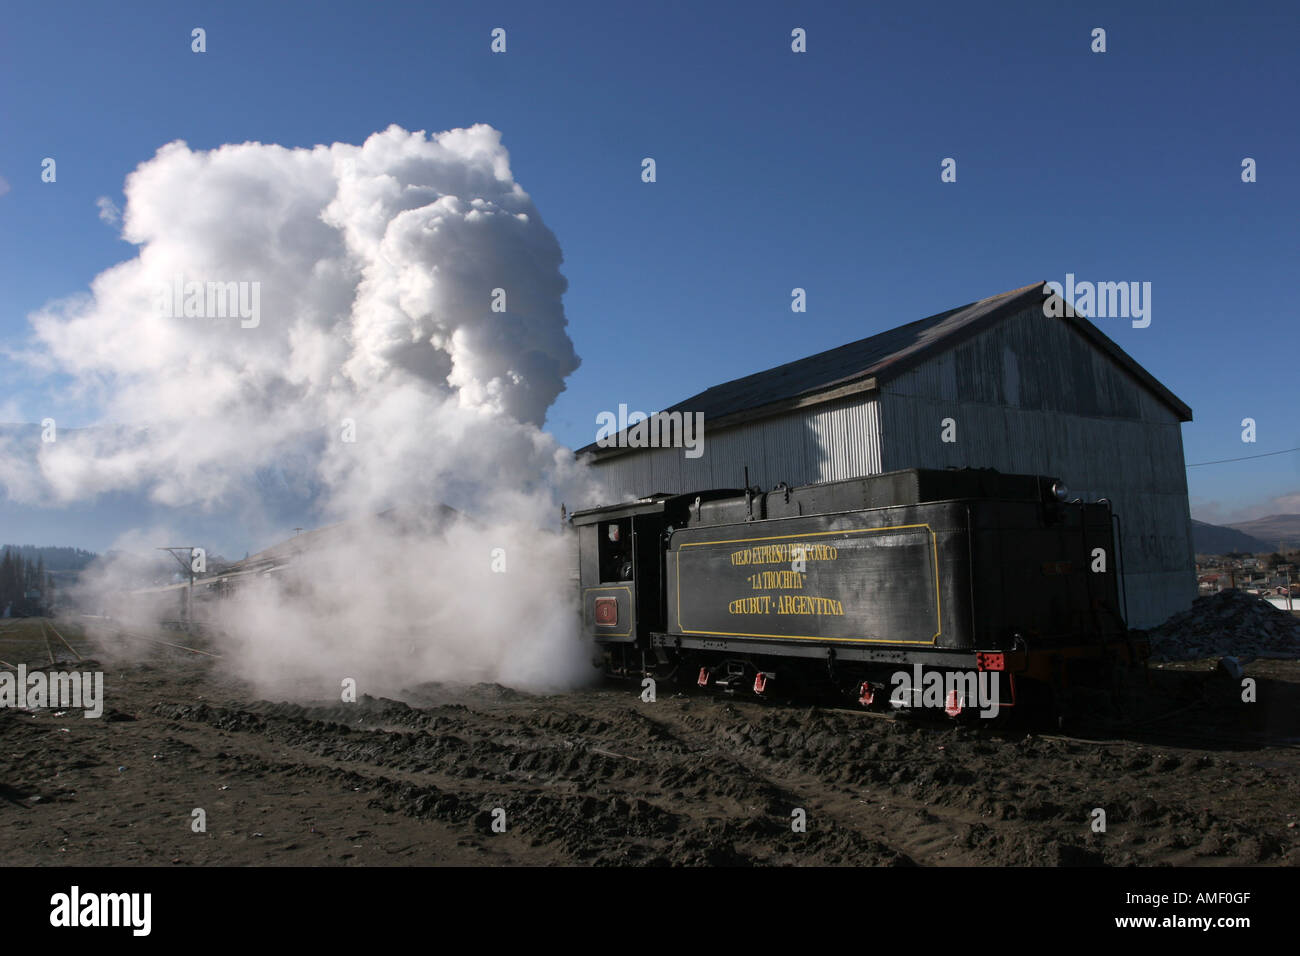 Old steam train locomotive La Trochita leaving the station of the town of Esquel, Chubut, Patagonia, Argentina. Stock Photo